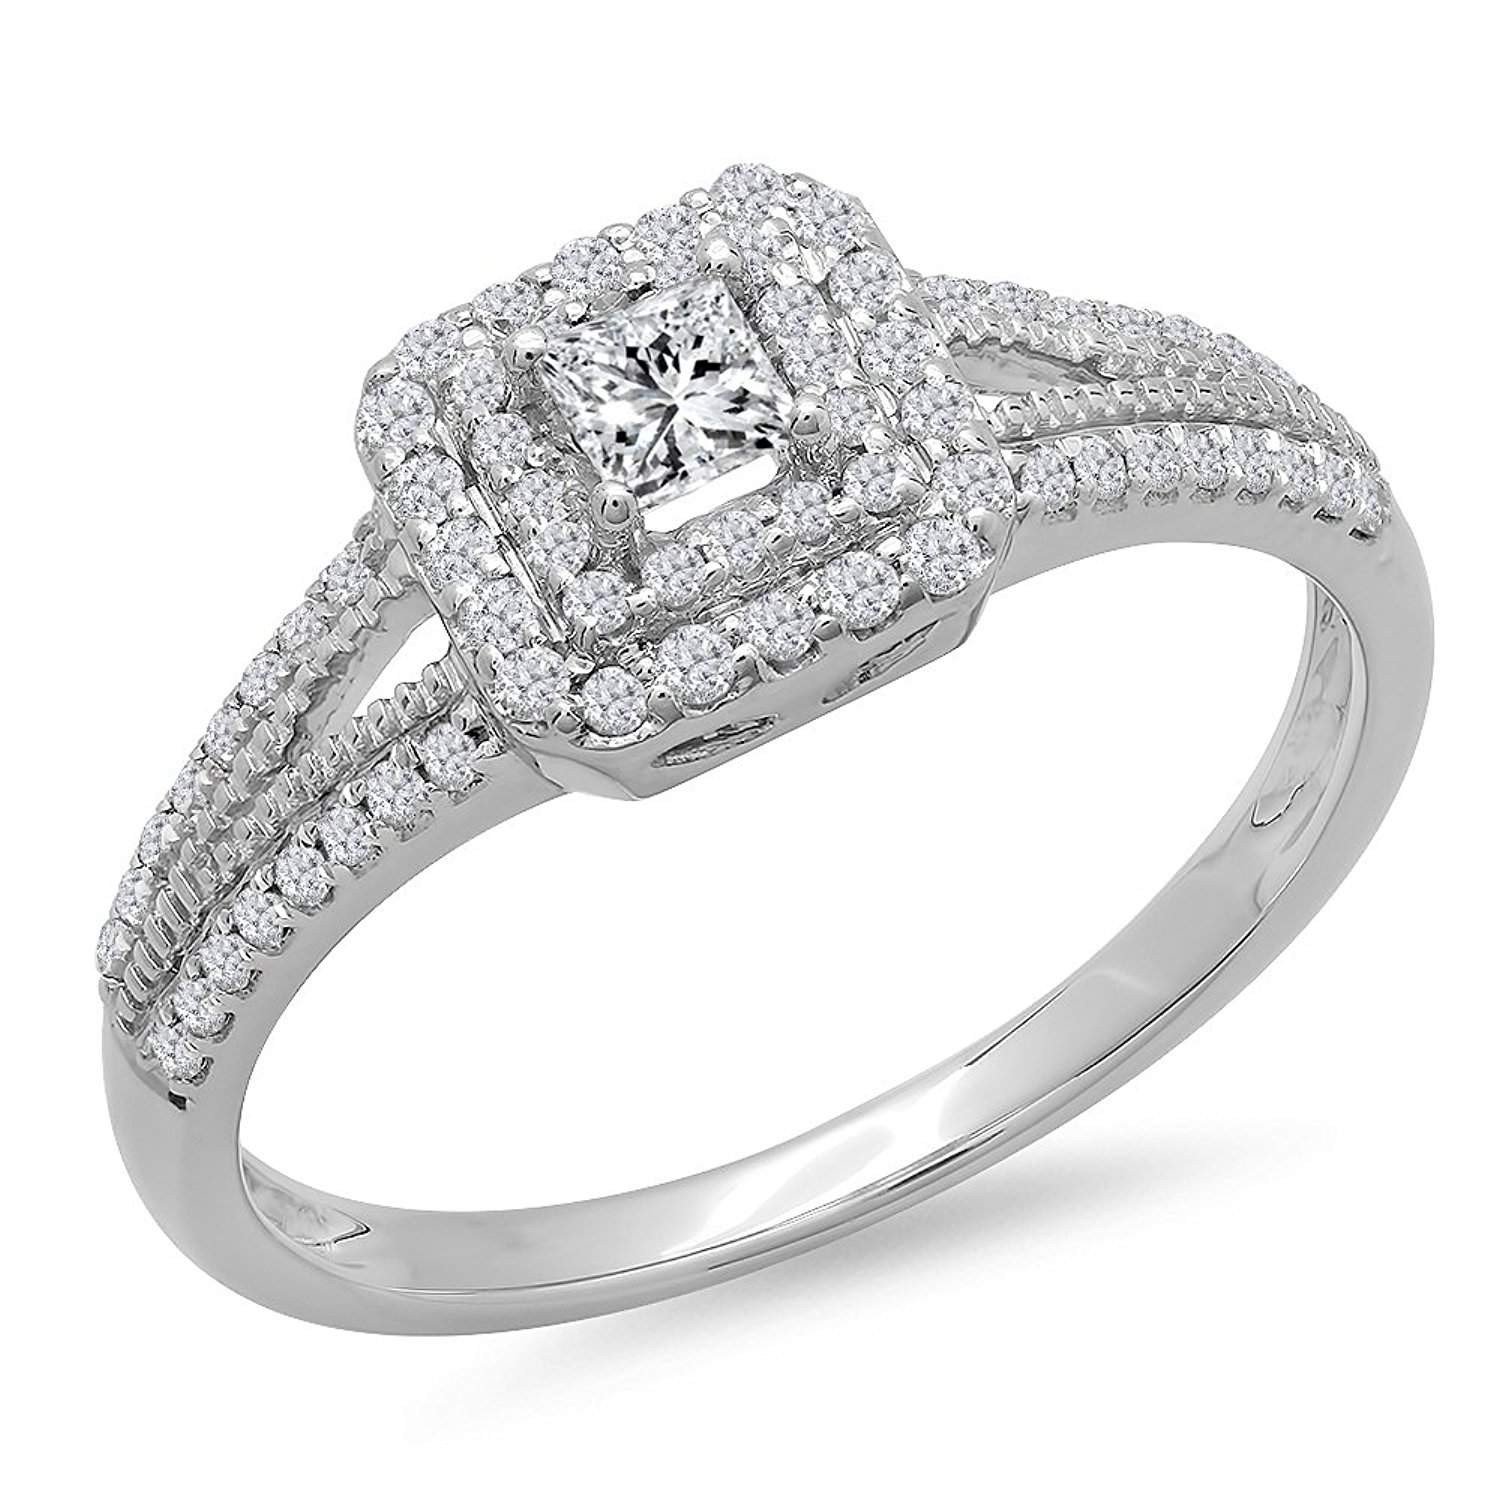 Affordable Wedding Rings
 Top 10 Best Valentine’s Day Deals on Engagement Rings